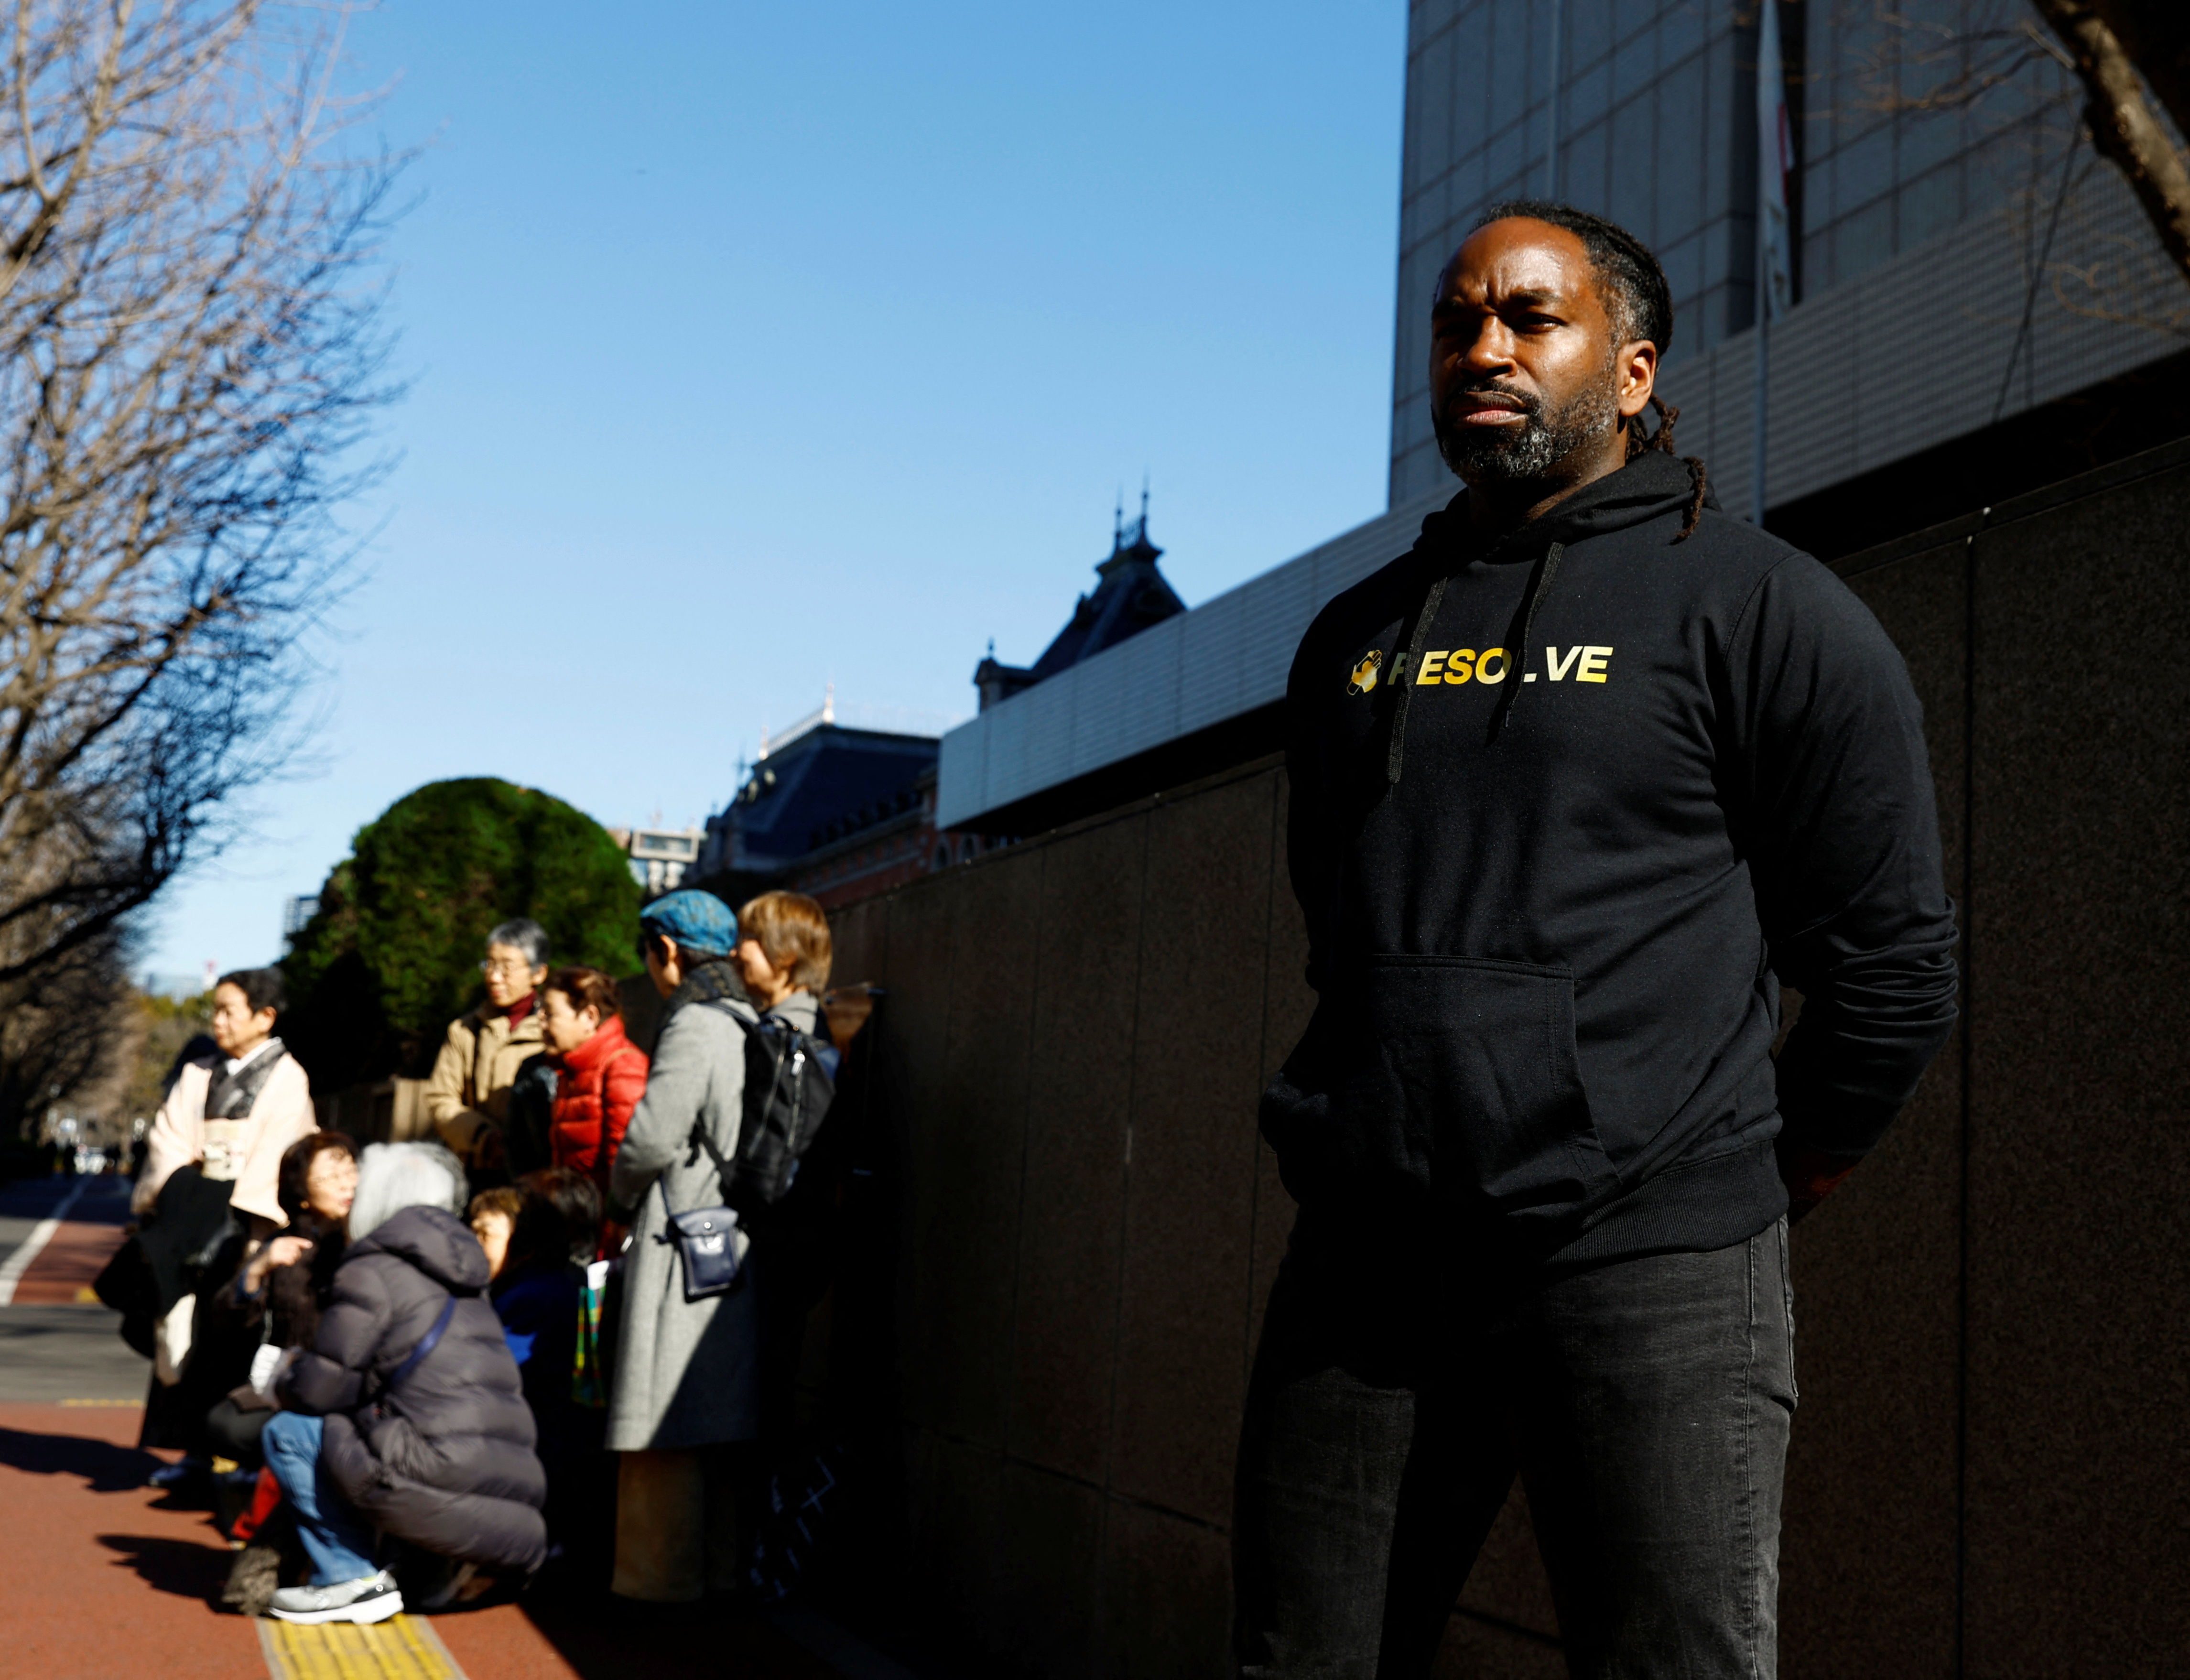 Foreign-born residents of Japan filed a lawsuit against the national and local governments over alleged illegal questioning by police based on racial profilingin Tokyo